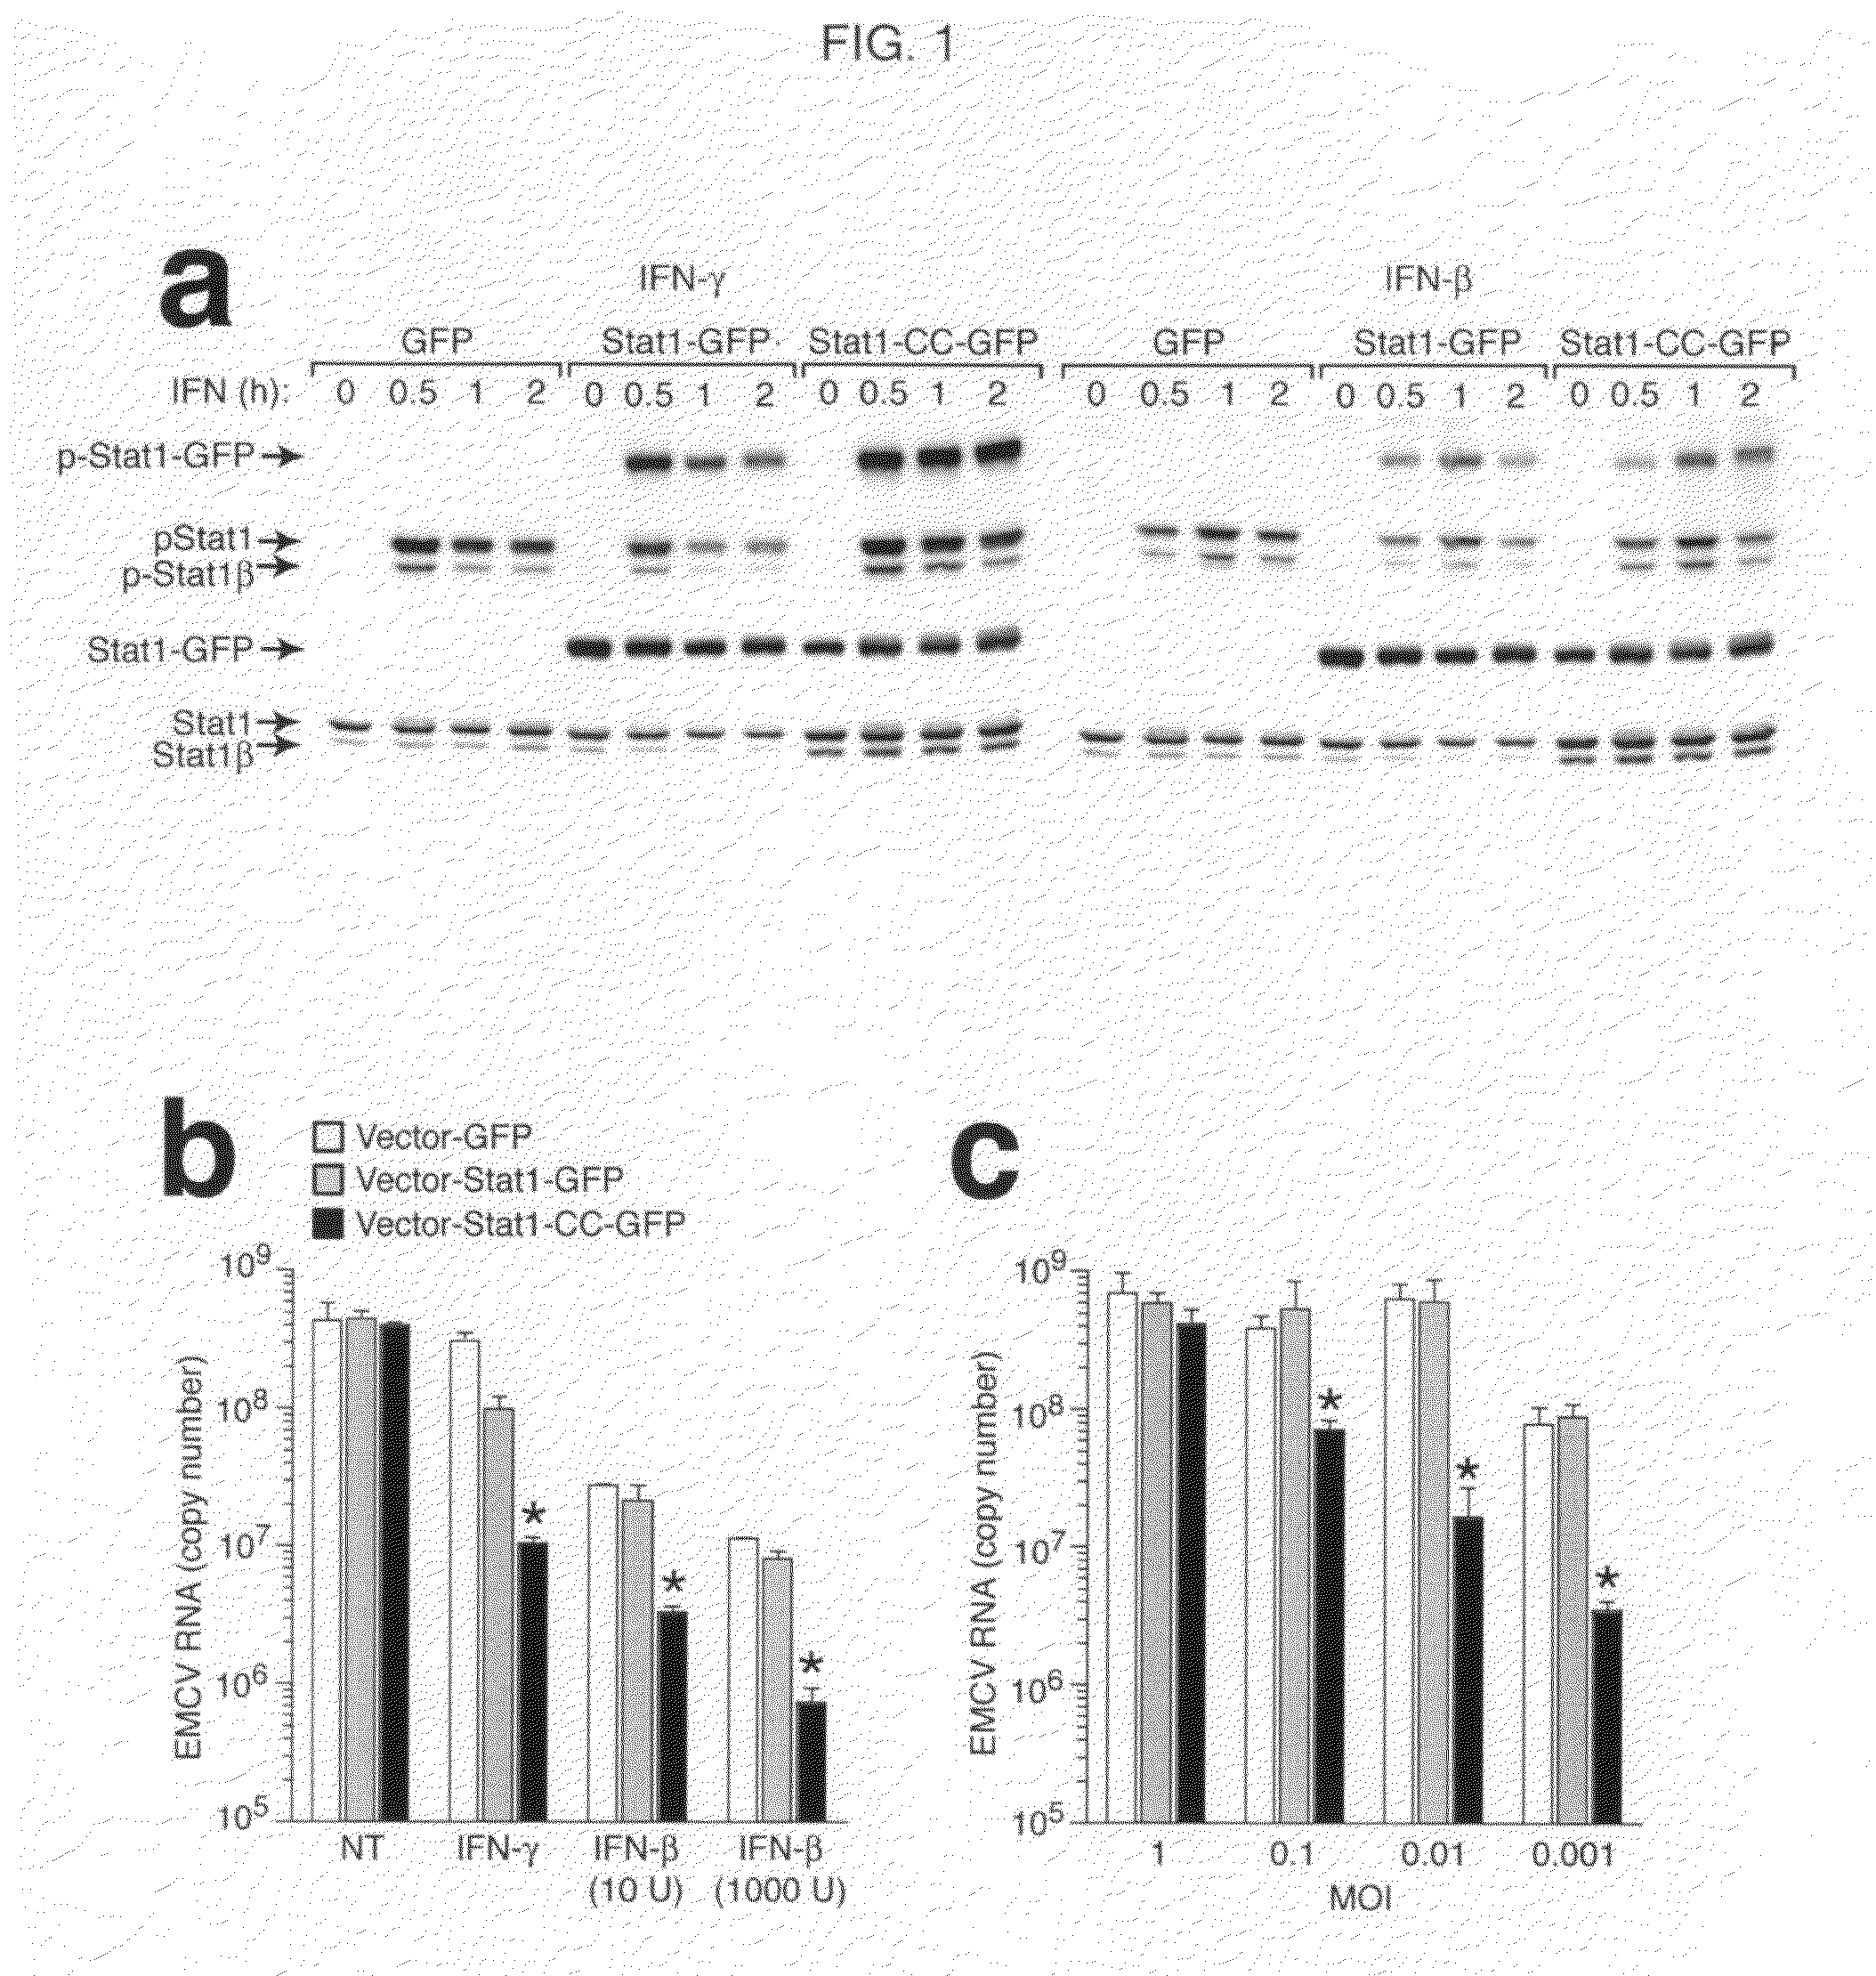 Modified stat1 transgene that confers interferon hyperresponsiveness, methods and uses therefor